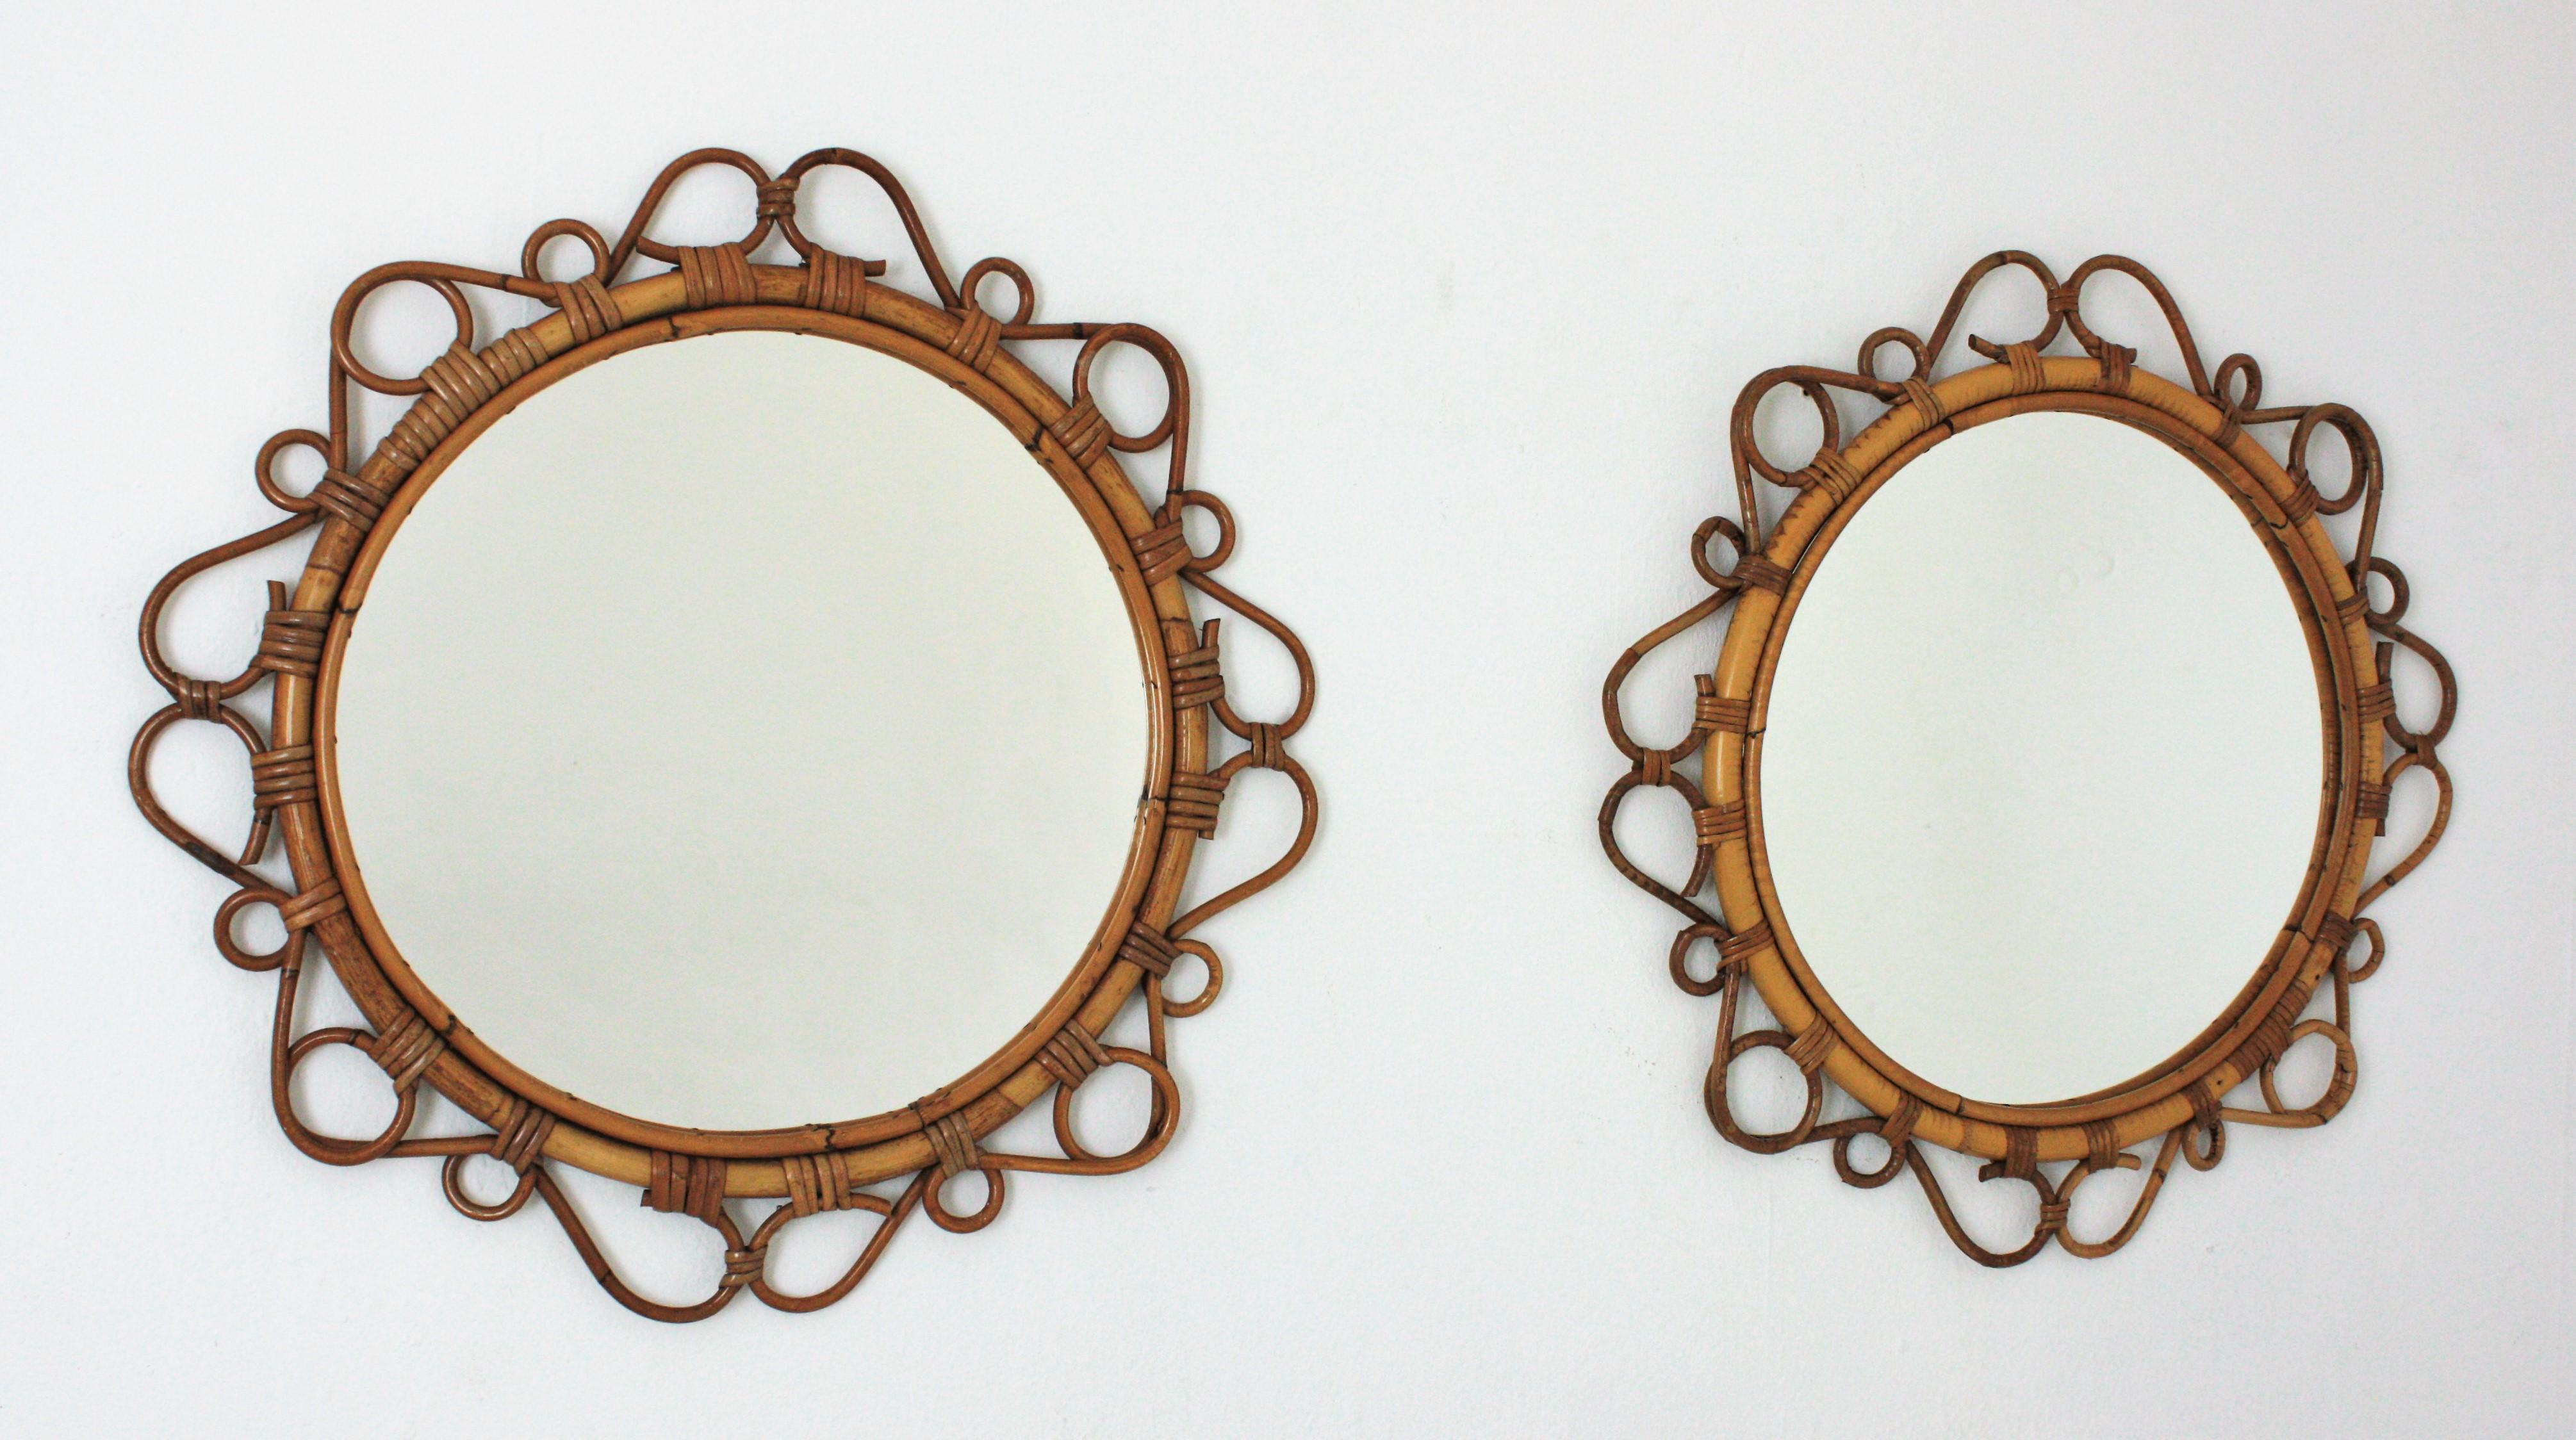 A pair of eye-catching handcrafted bamboo and rattan mirrors with scroll detailings surrounding the frame, Spain, 1960s. 
These Mediterranean wall mirrors feature a circular bamboo frame surrounded by rattan scroll and circle decorations.
They